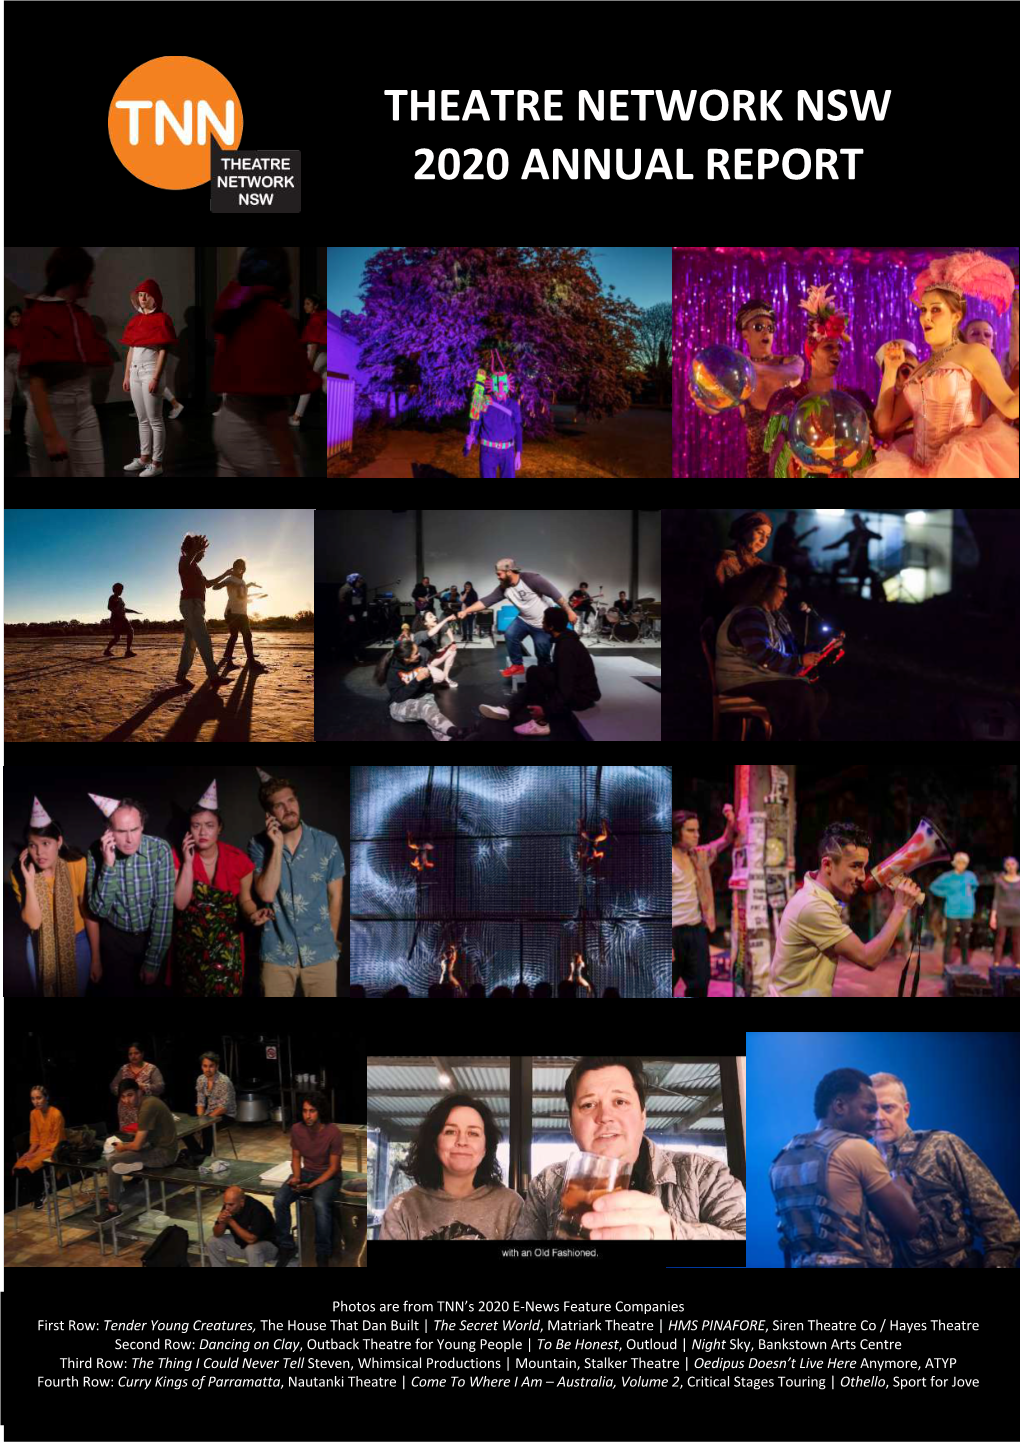 Theatre Network NSW 2020 – a Year in Review